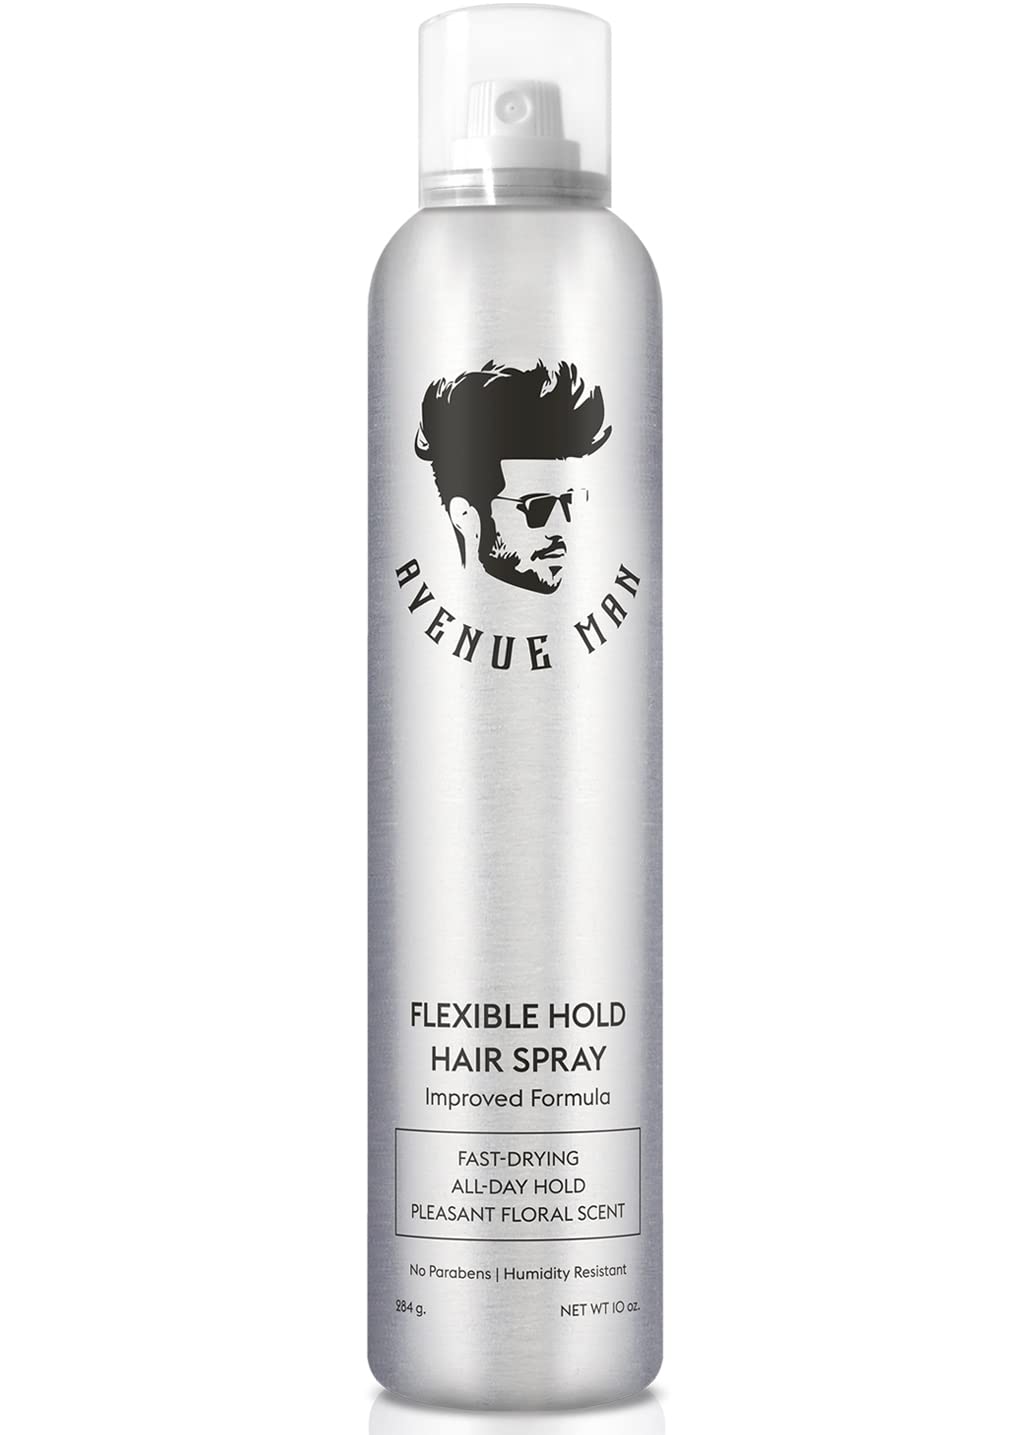 Super Flexible Hold Hair Spray For Men (New & Improved Formula) - (10 oz) -  by Avenue Man Hair Products - Super Strong Hold & Fast Drying Hairspray  with Organic Extracts for